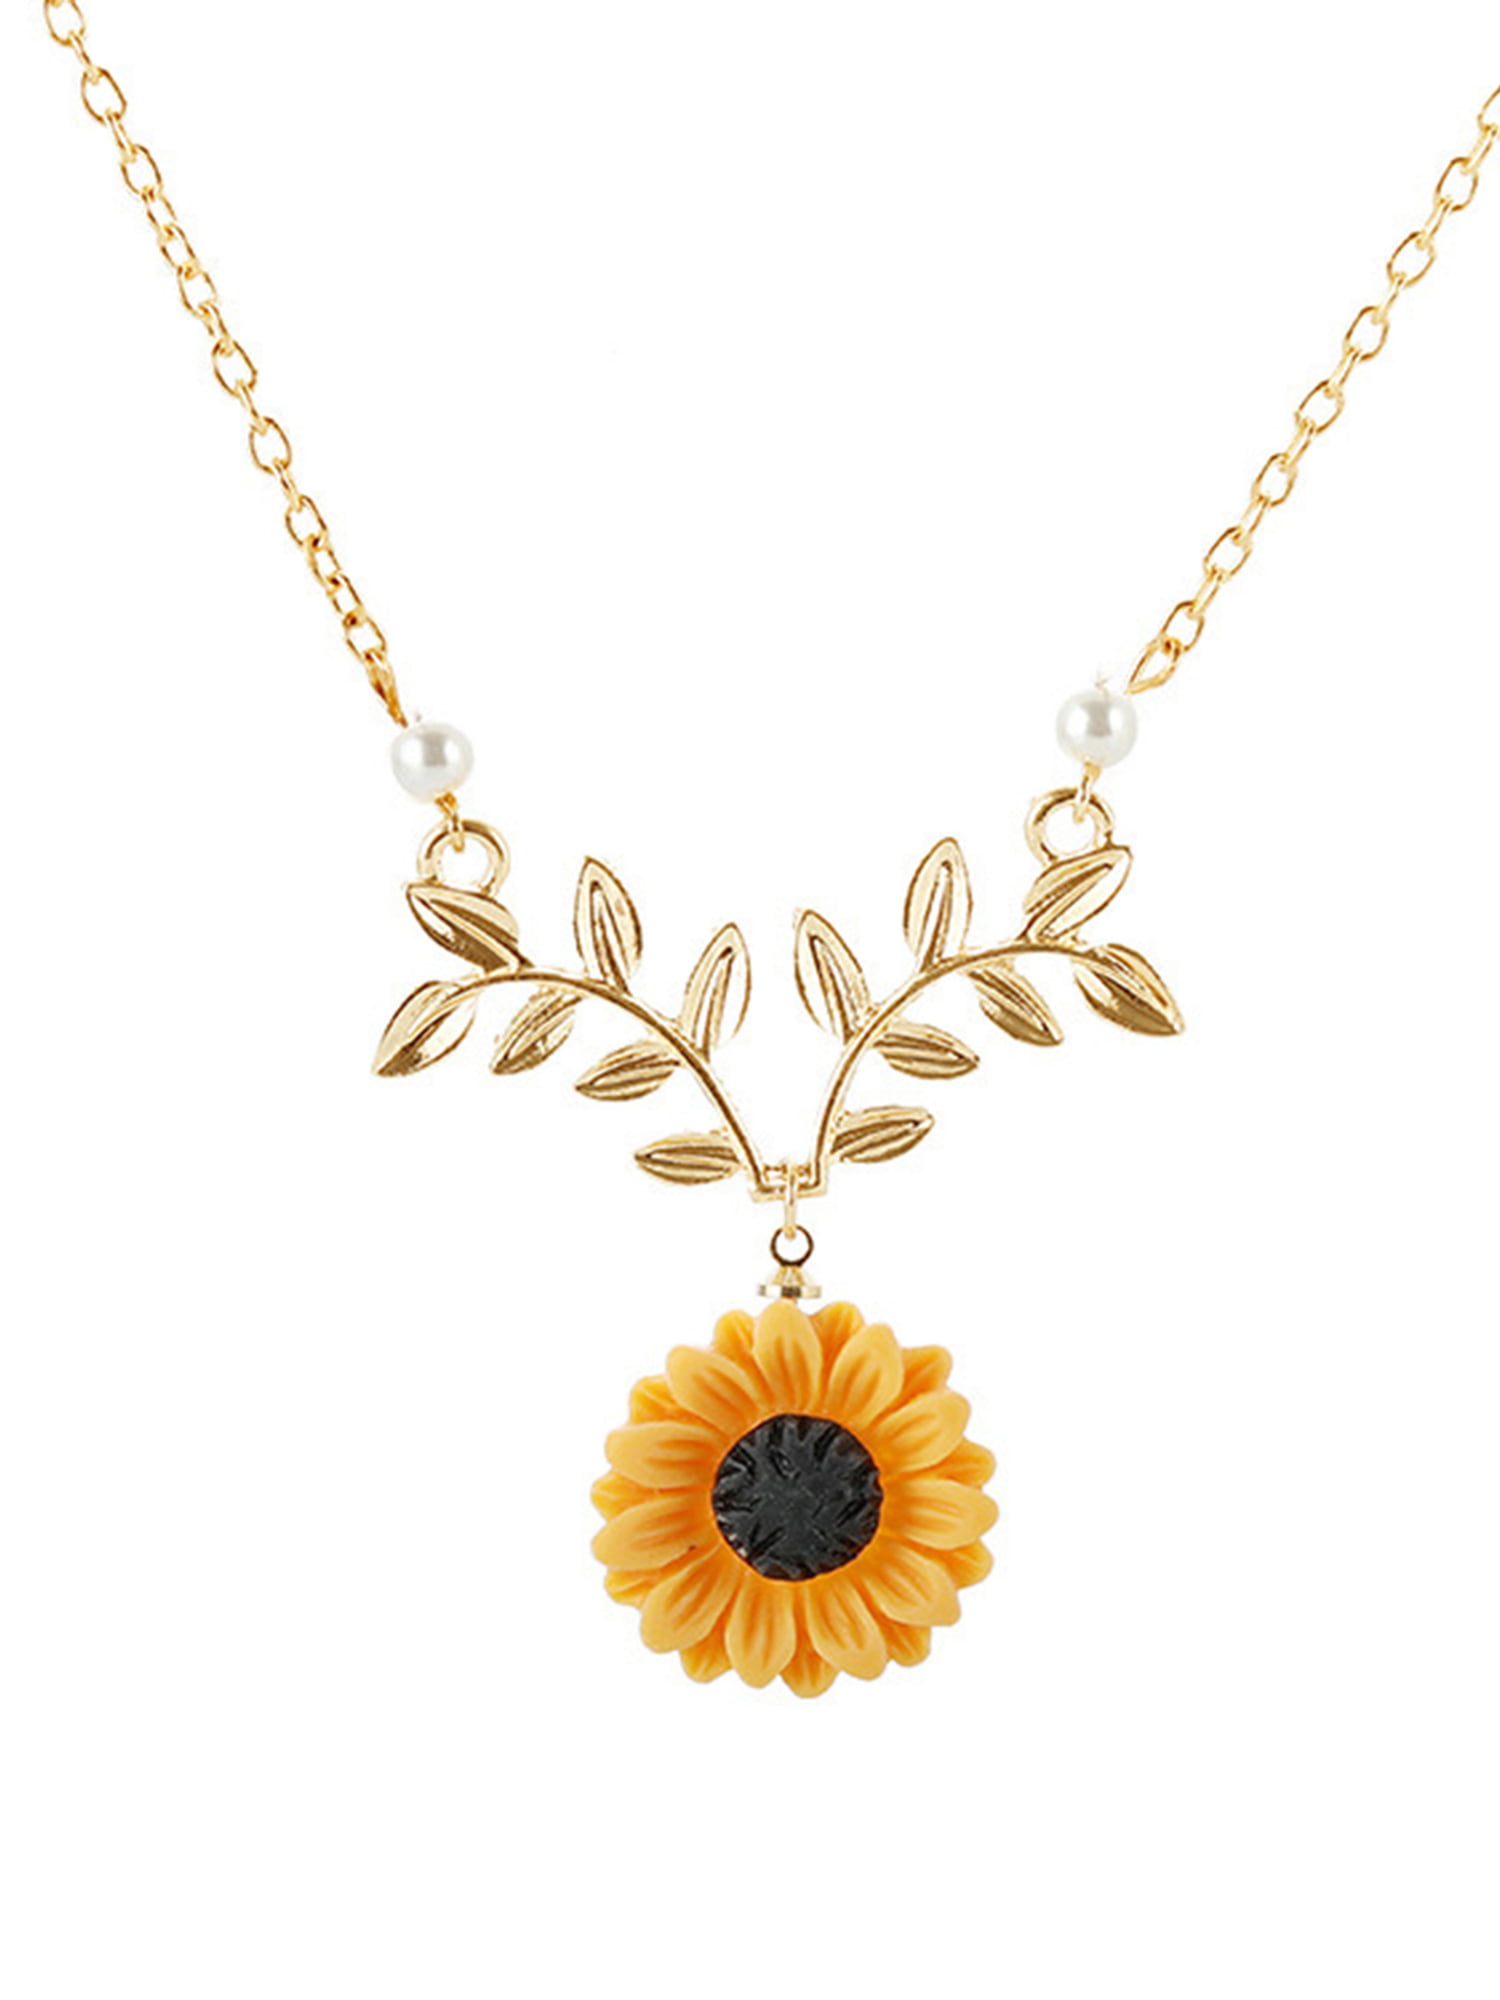 GAJSDJHN Necklace Jewelry Sun Flower Necklace Pendant Rhinestone Stainless Steel/Gold Color Rope Chain for Women Party Chic Jewelry